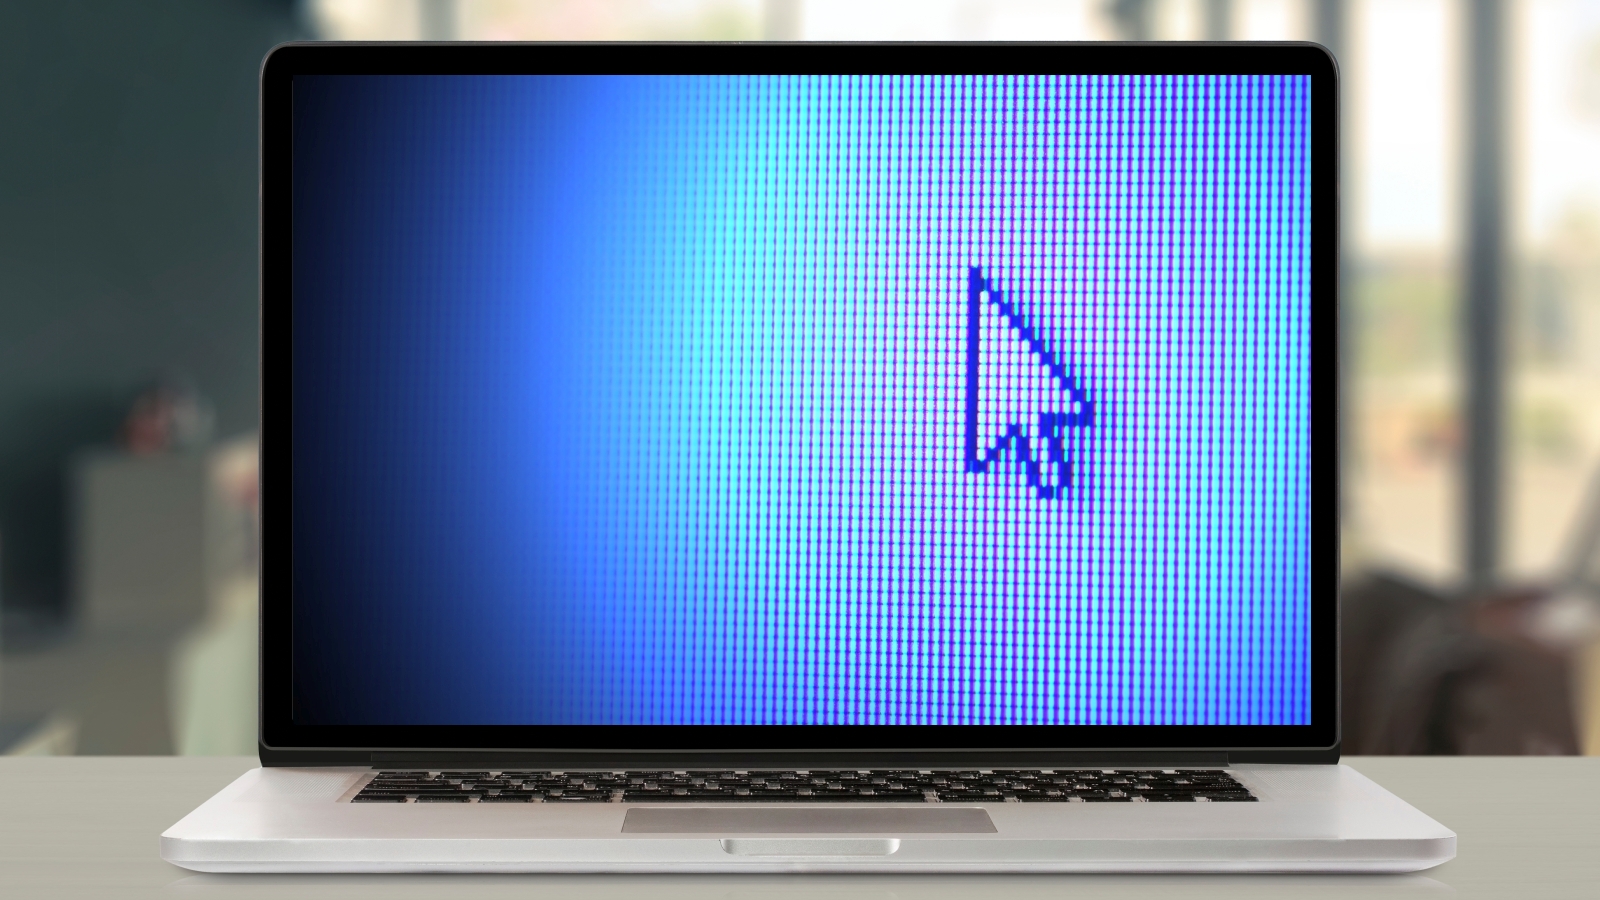 2 Easy Ways to Customize the Mouse Cursor in Windows 11